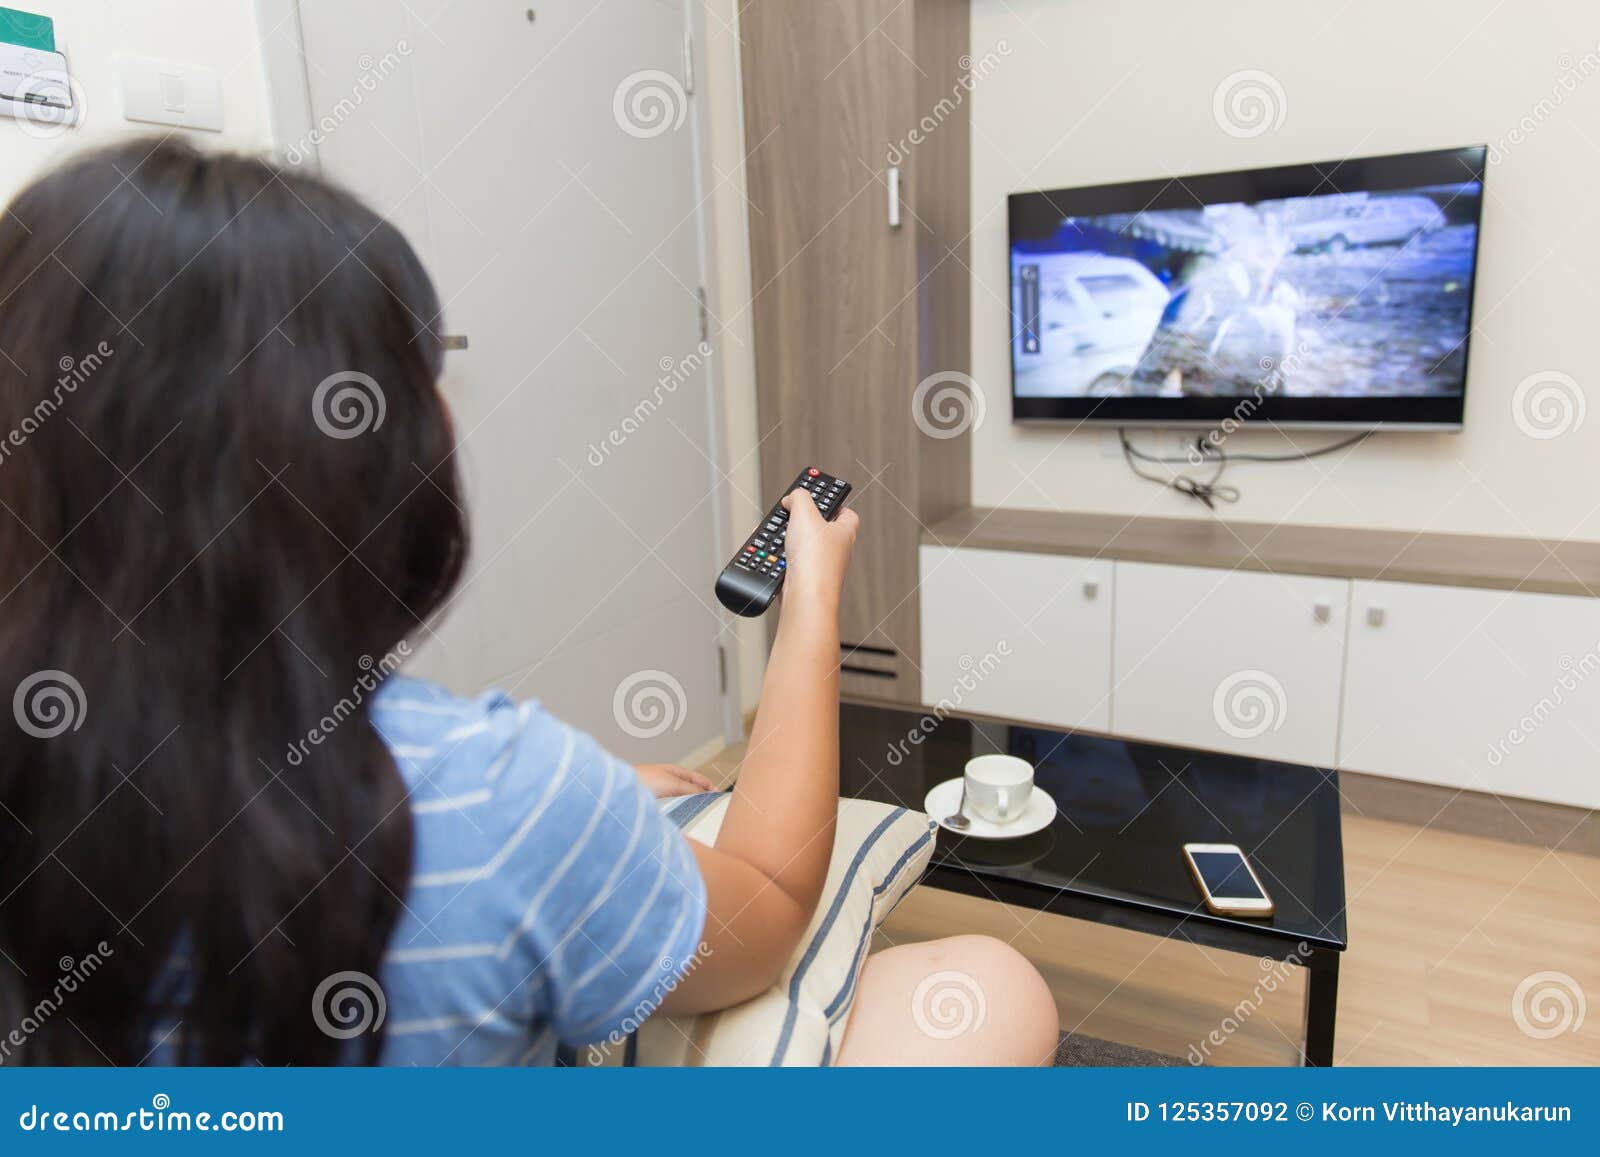 Girl Watching Tv In Living Room Stock Photo Image Of Rear